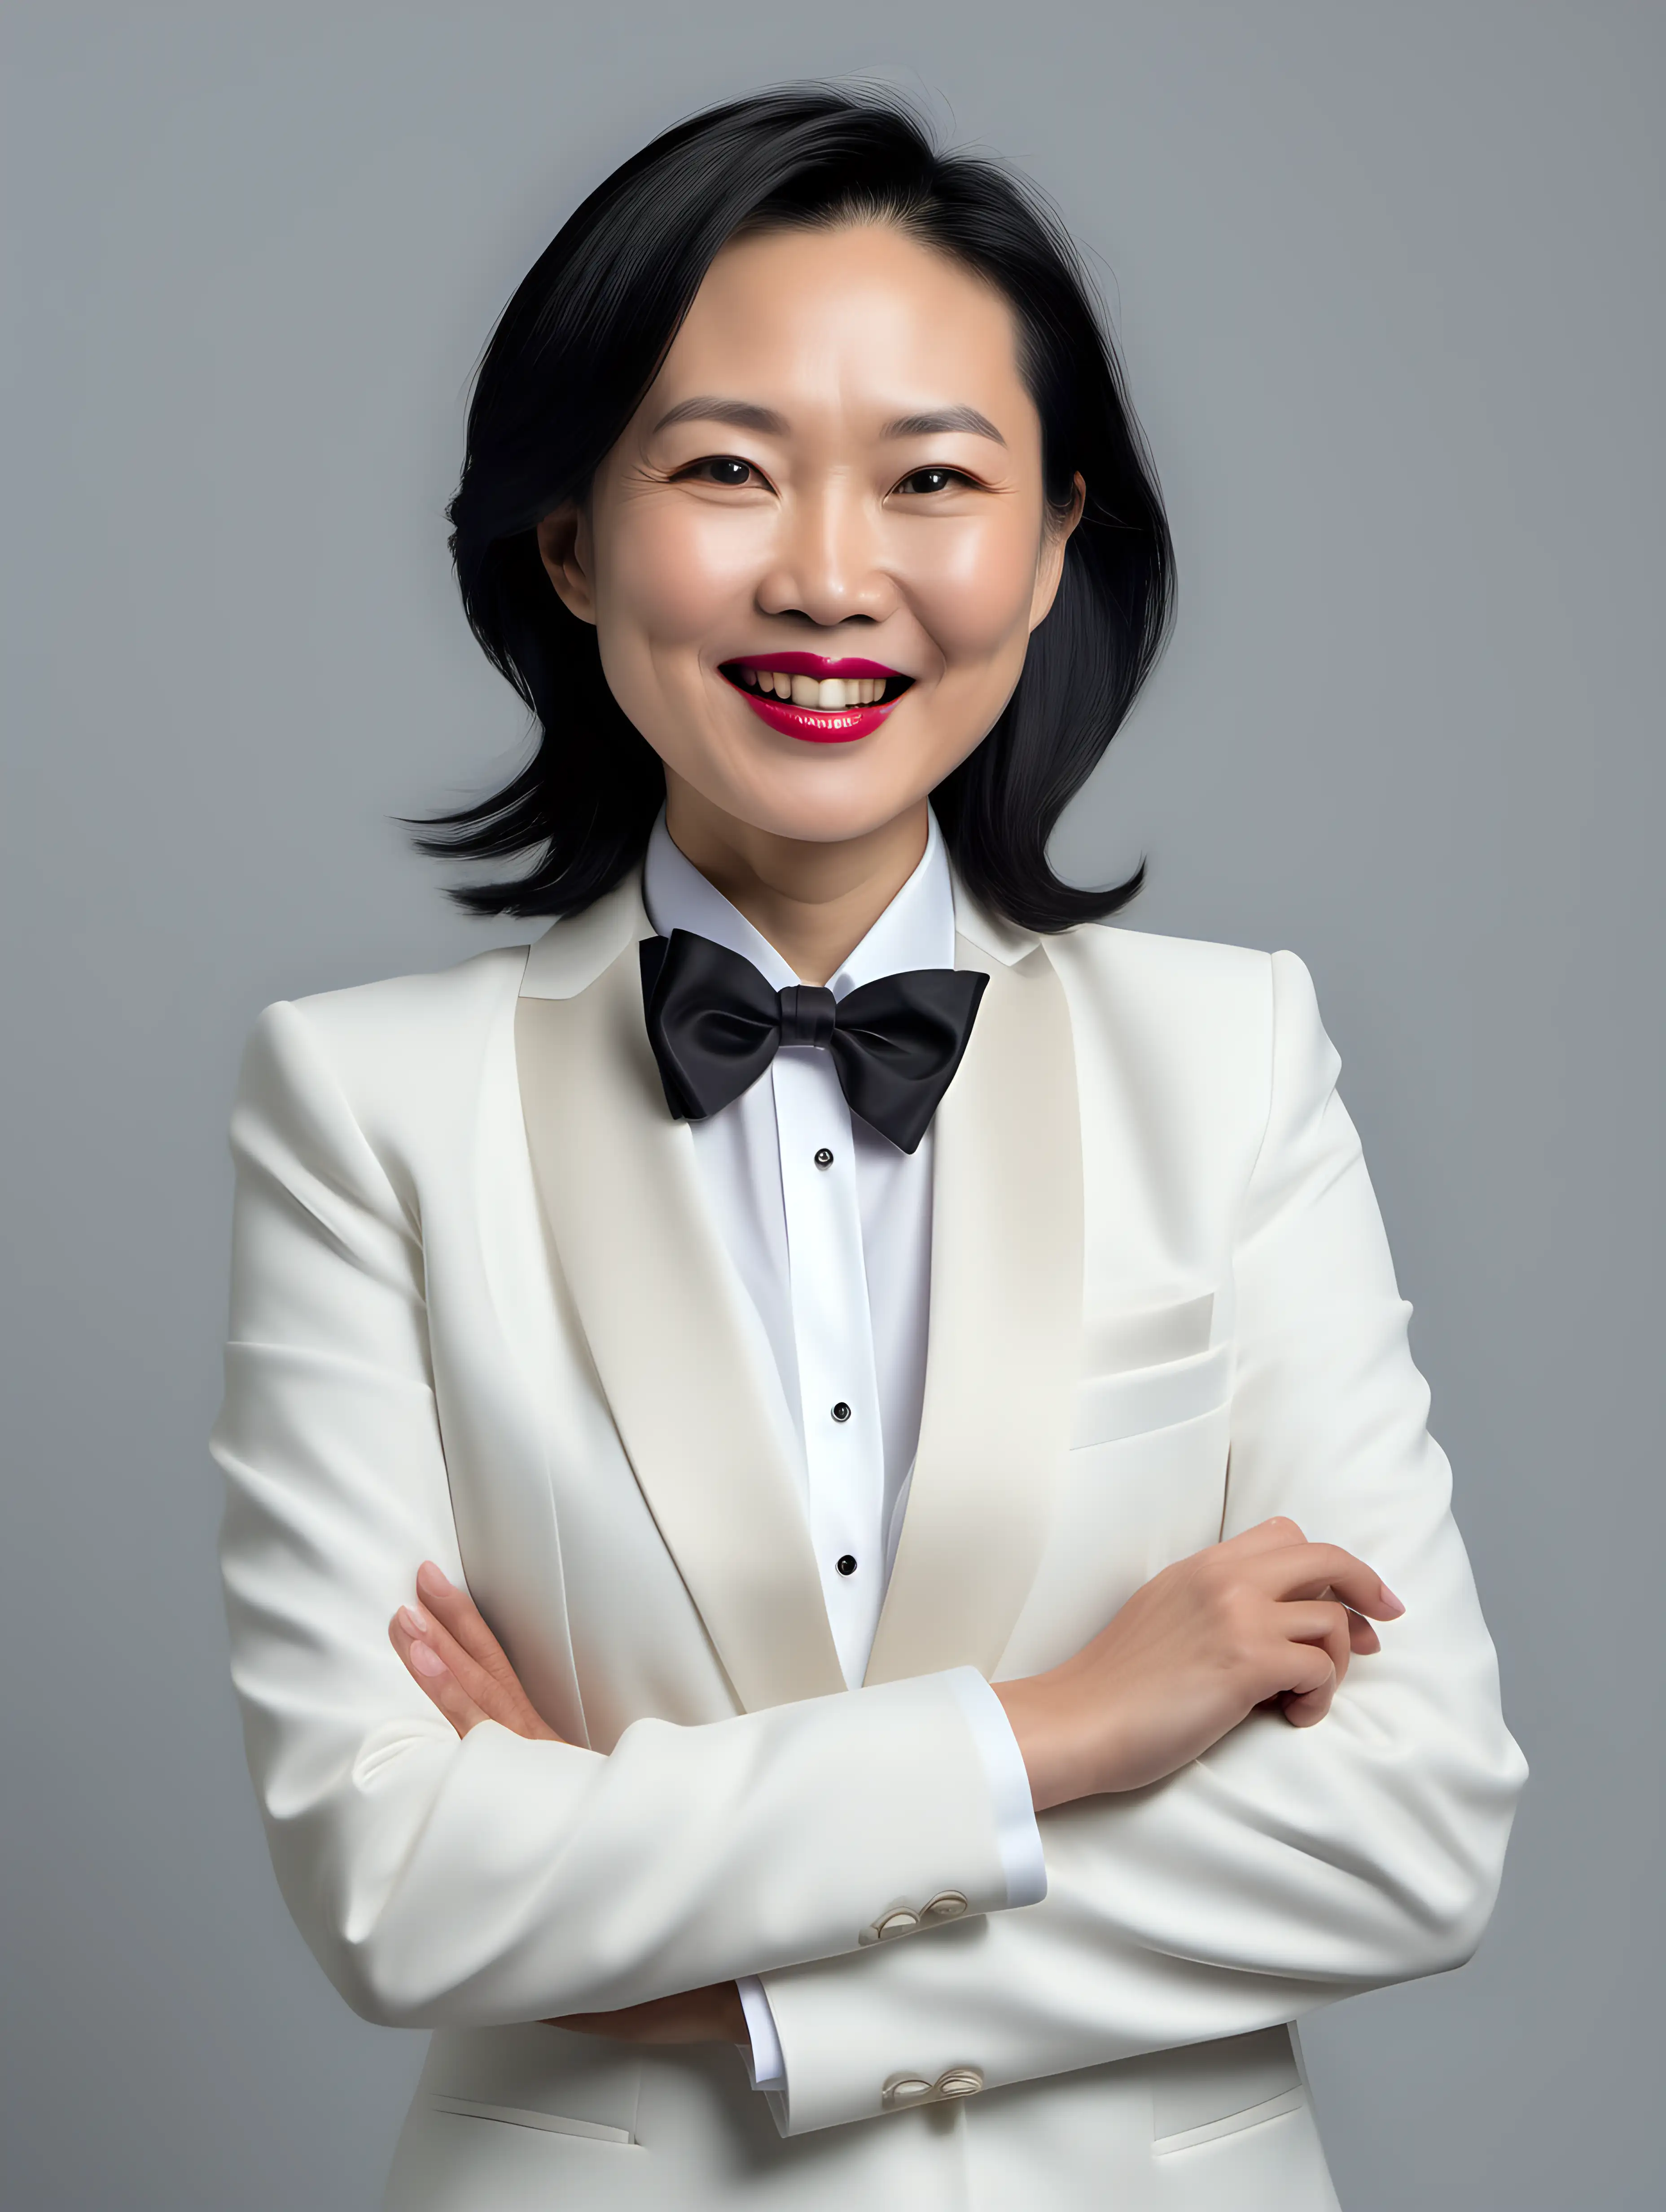 cute and sophisticated and confident and smiling and laughing 40 year old Chinese woman with shoulder length hair and lipstick wearing an ivory tuxedo with a white shirt and a black bow tie, crossing her arms